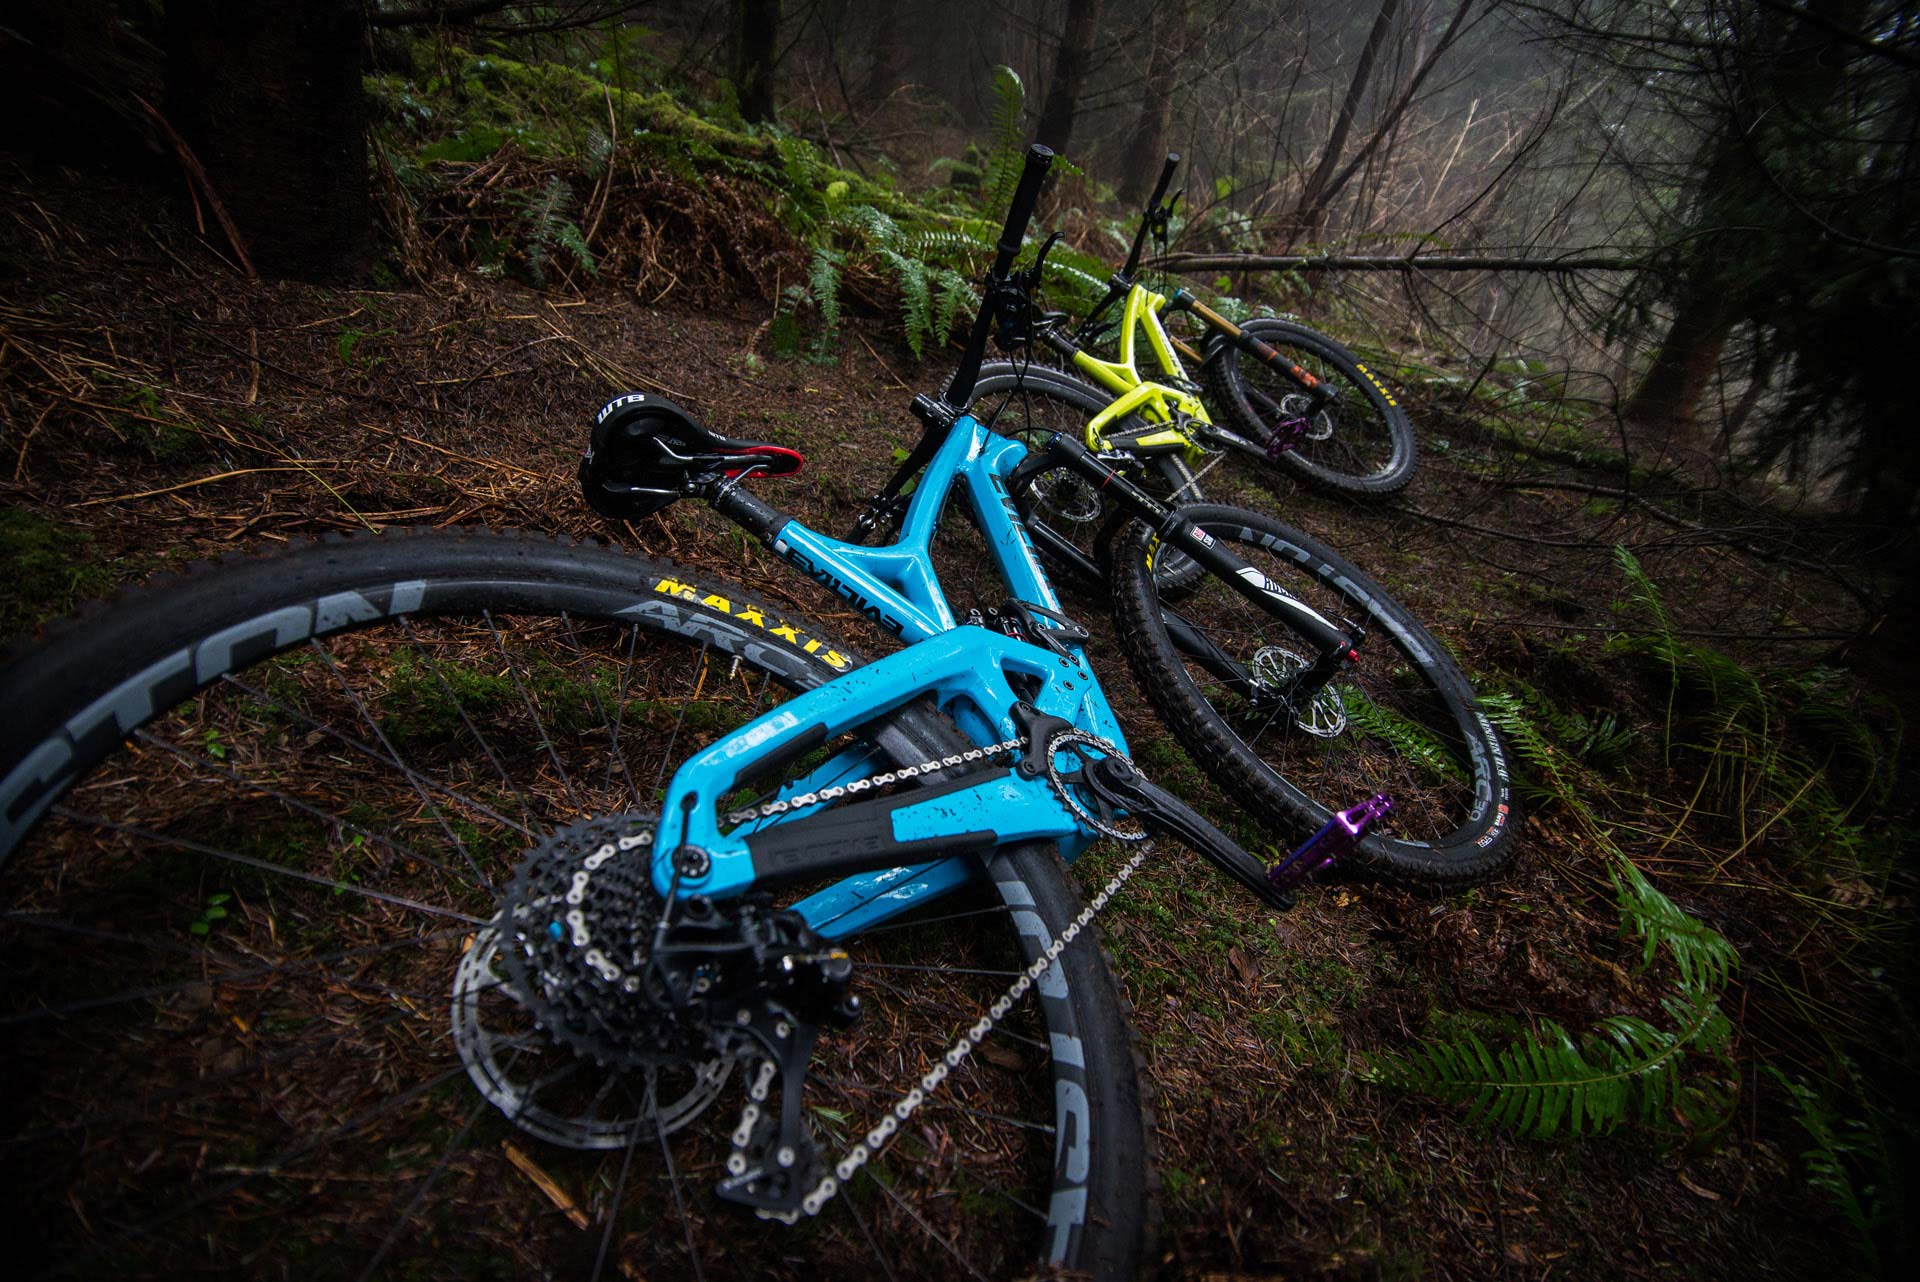 The Wreckoning in Megaladon Blue and the Insurgent in Slimeball Yellow, lounging in their natural habitat.